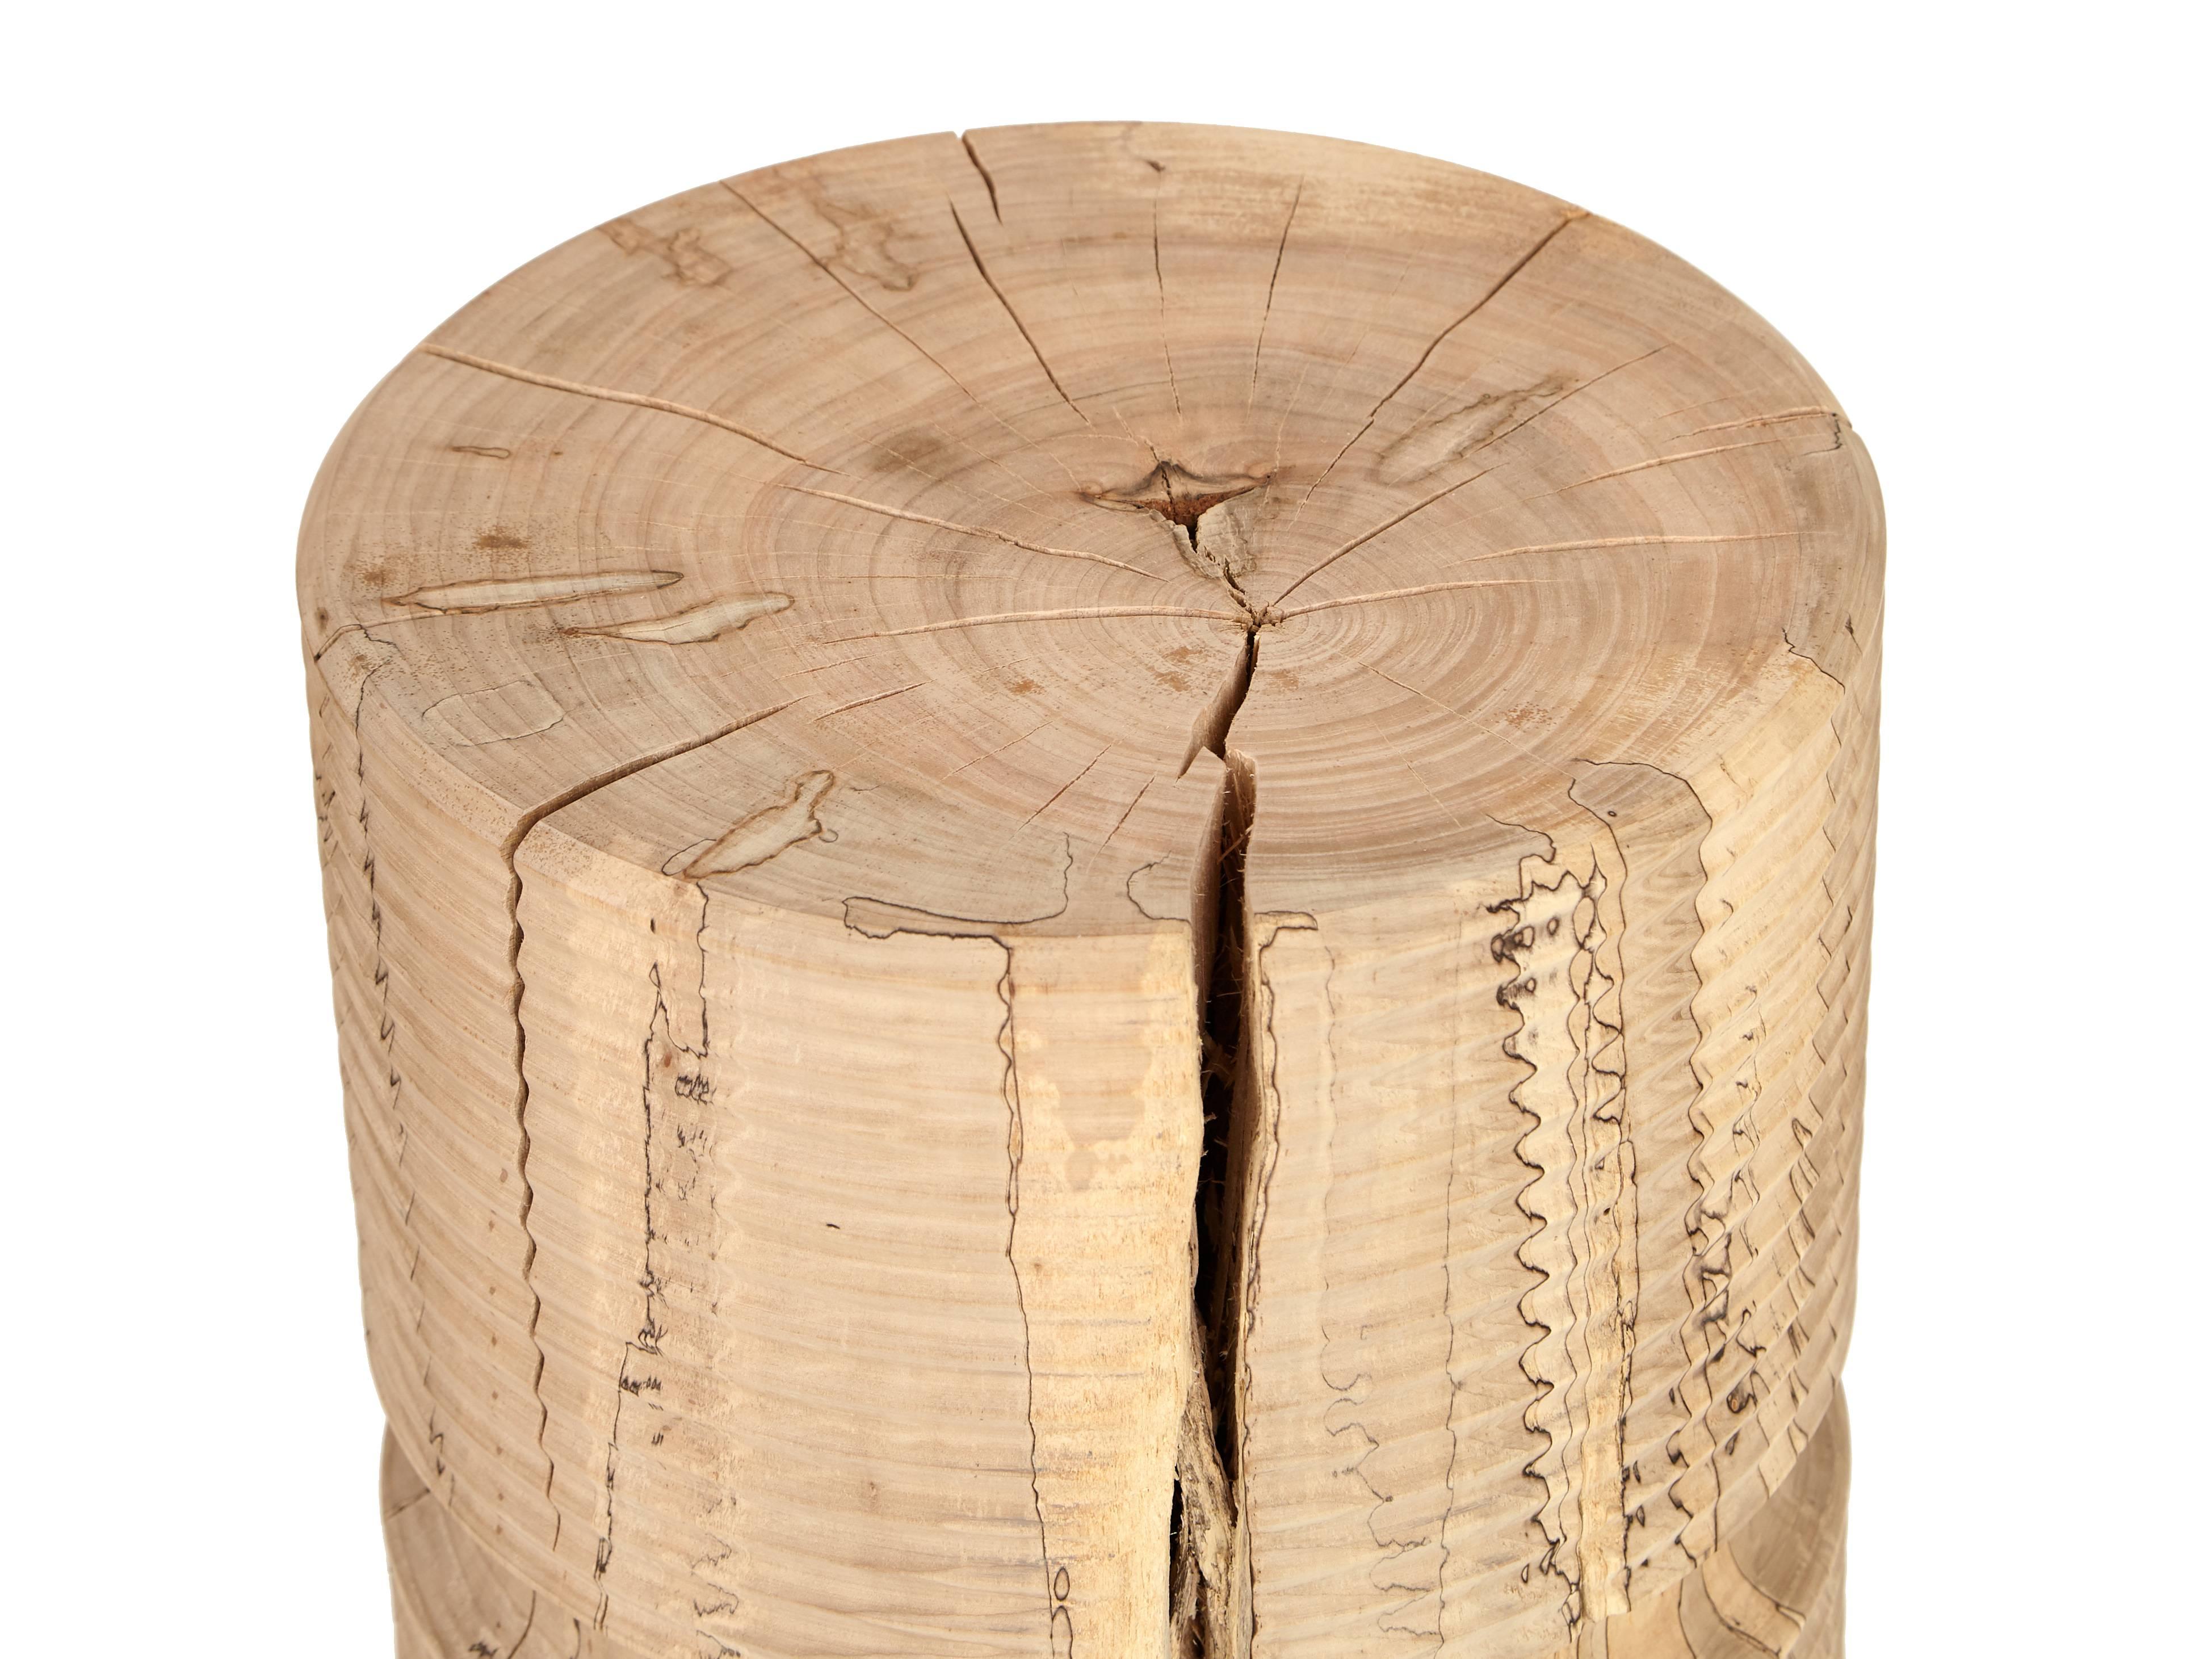 Agora stool or table orbit series by Claudio Sebastian stalling in solid lathe turned Spalted Maple kiln dried to control splitting over time finished with white oil hand rubbed finish.